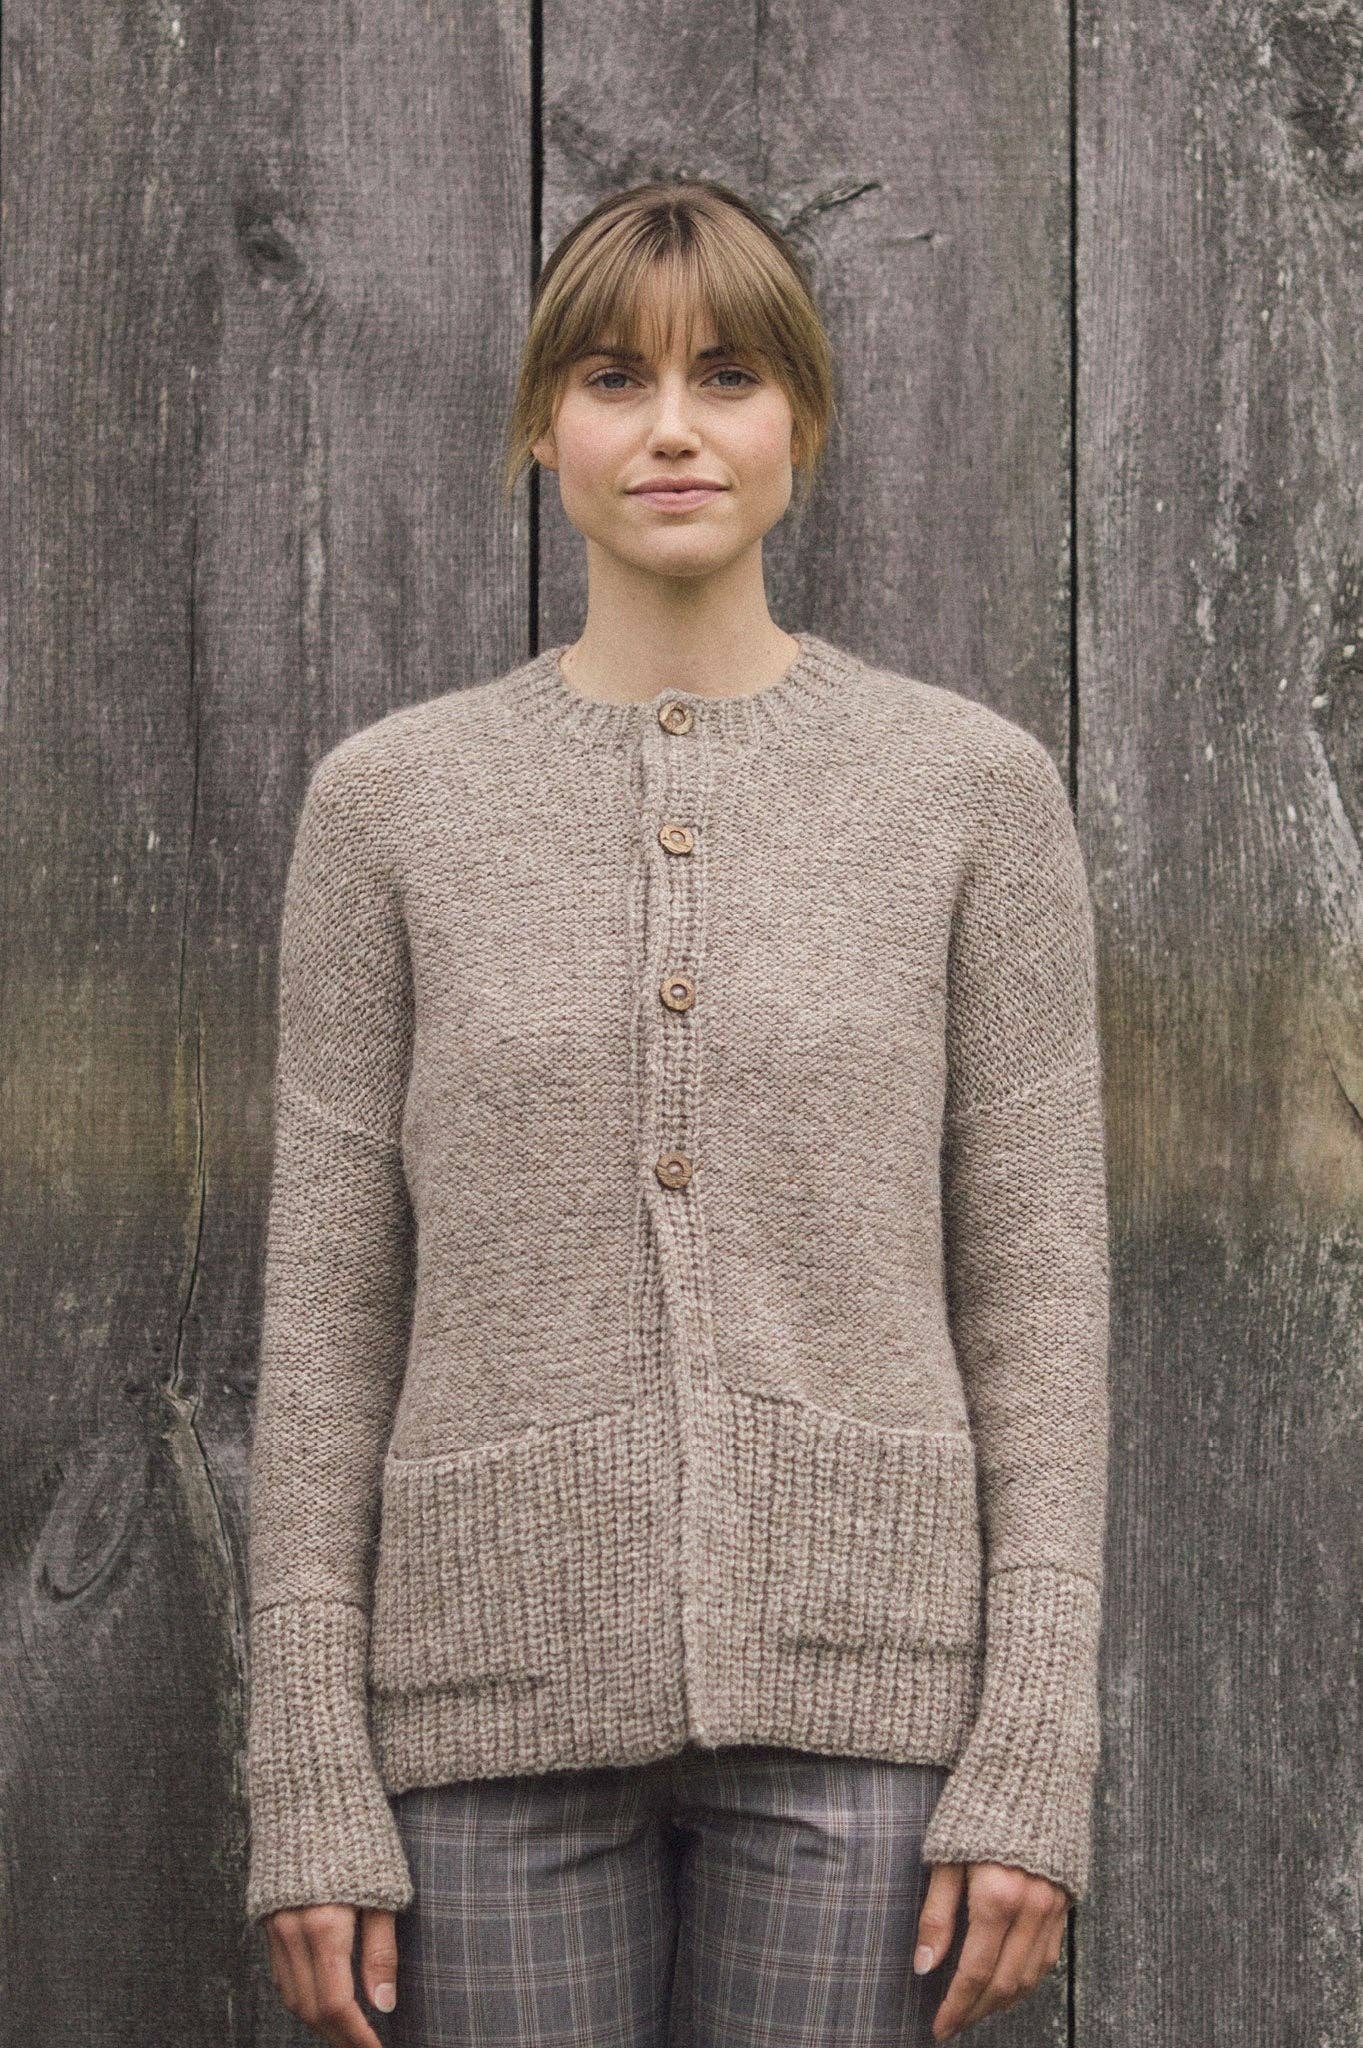 Plain and Simple: 11 Knits to Wear Every Day